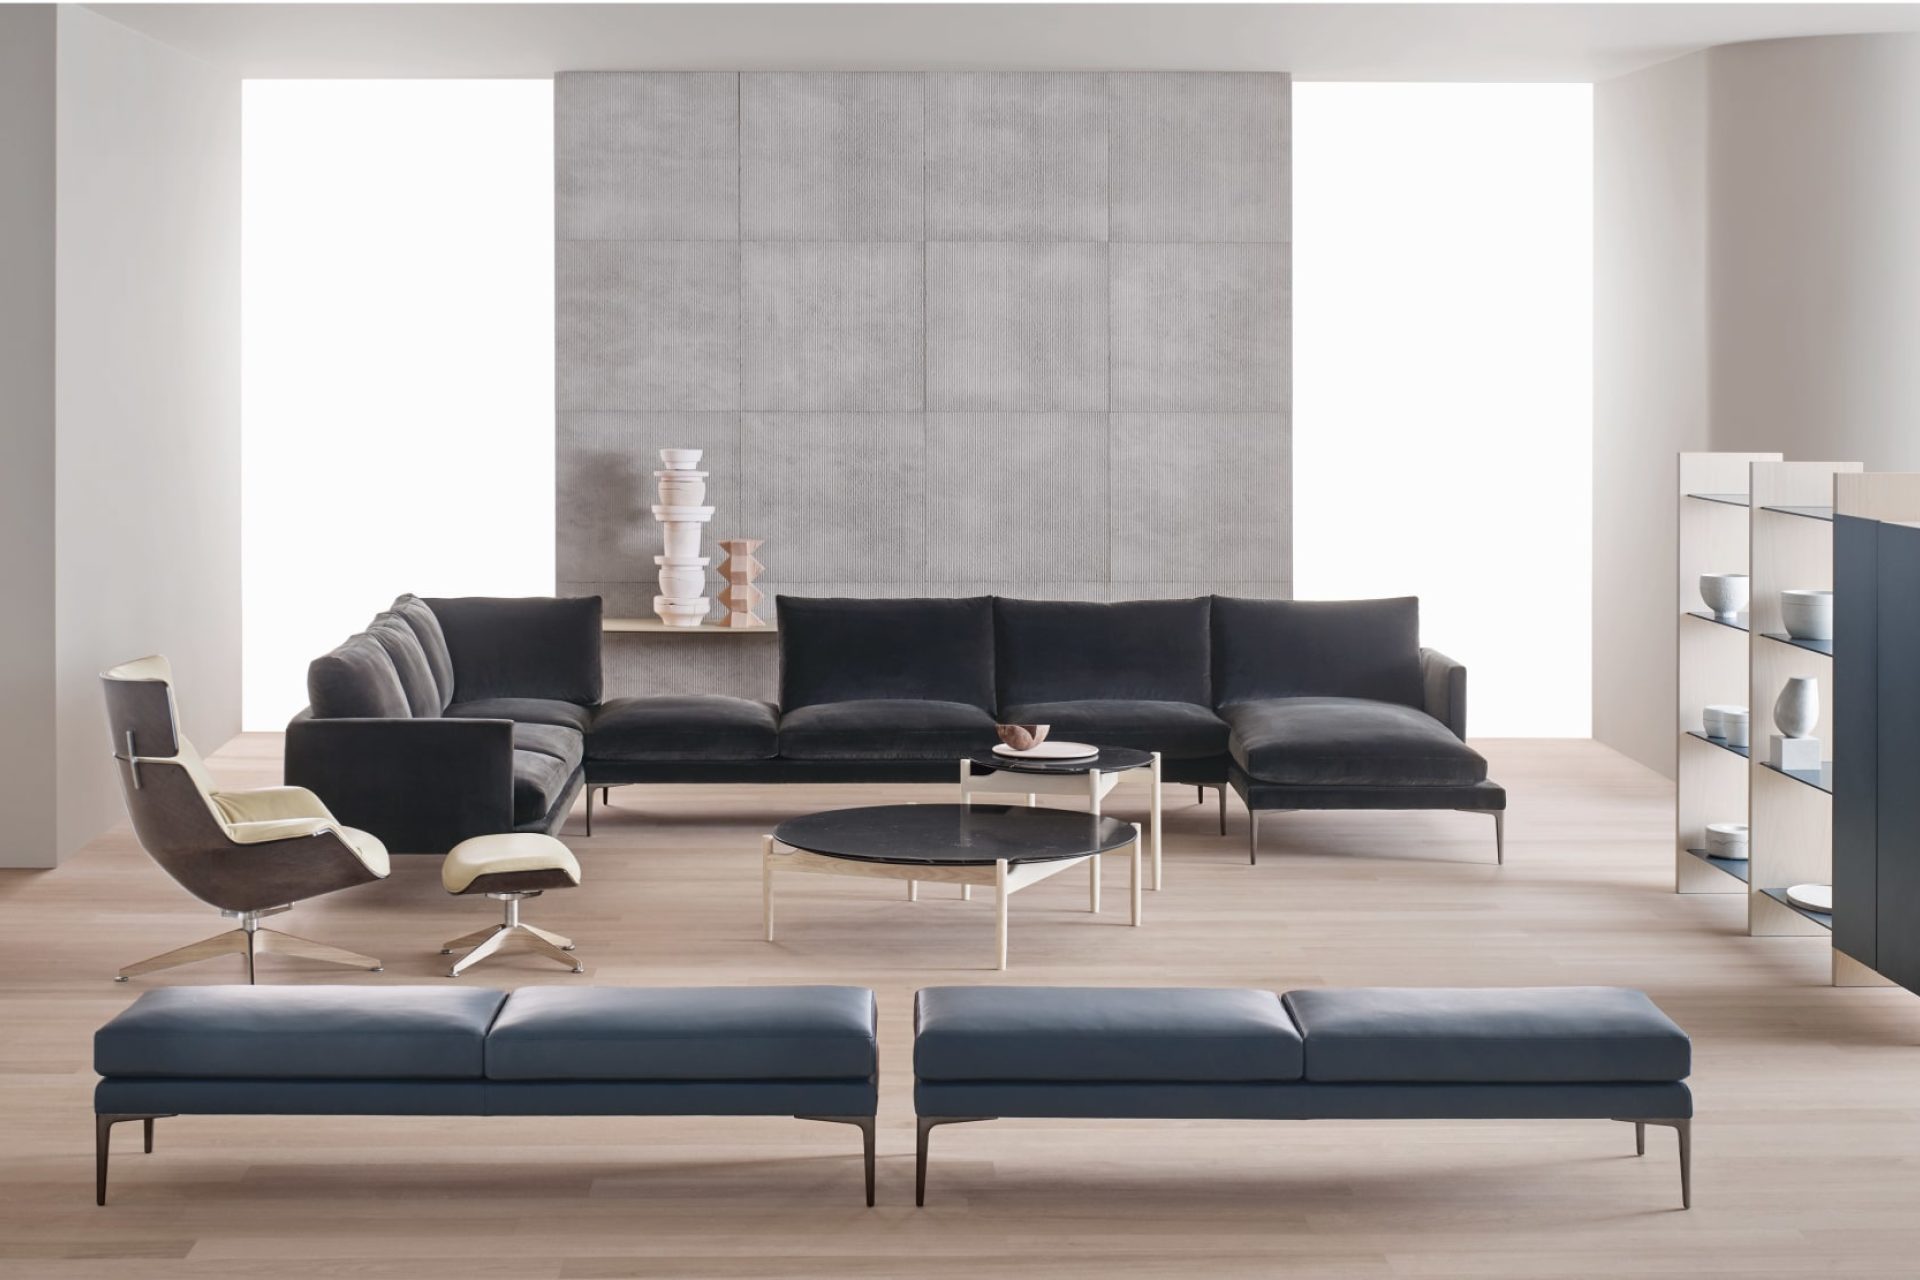 Living room environment comprised by a canvas corner sofa with a metal frame